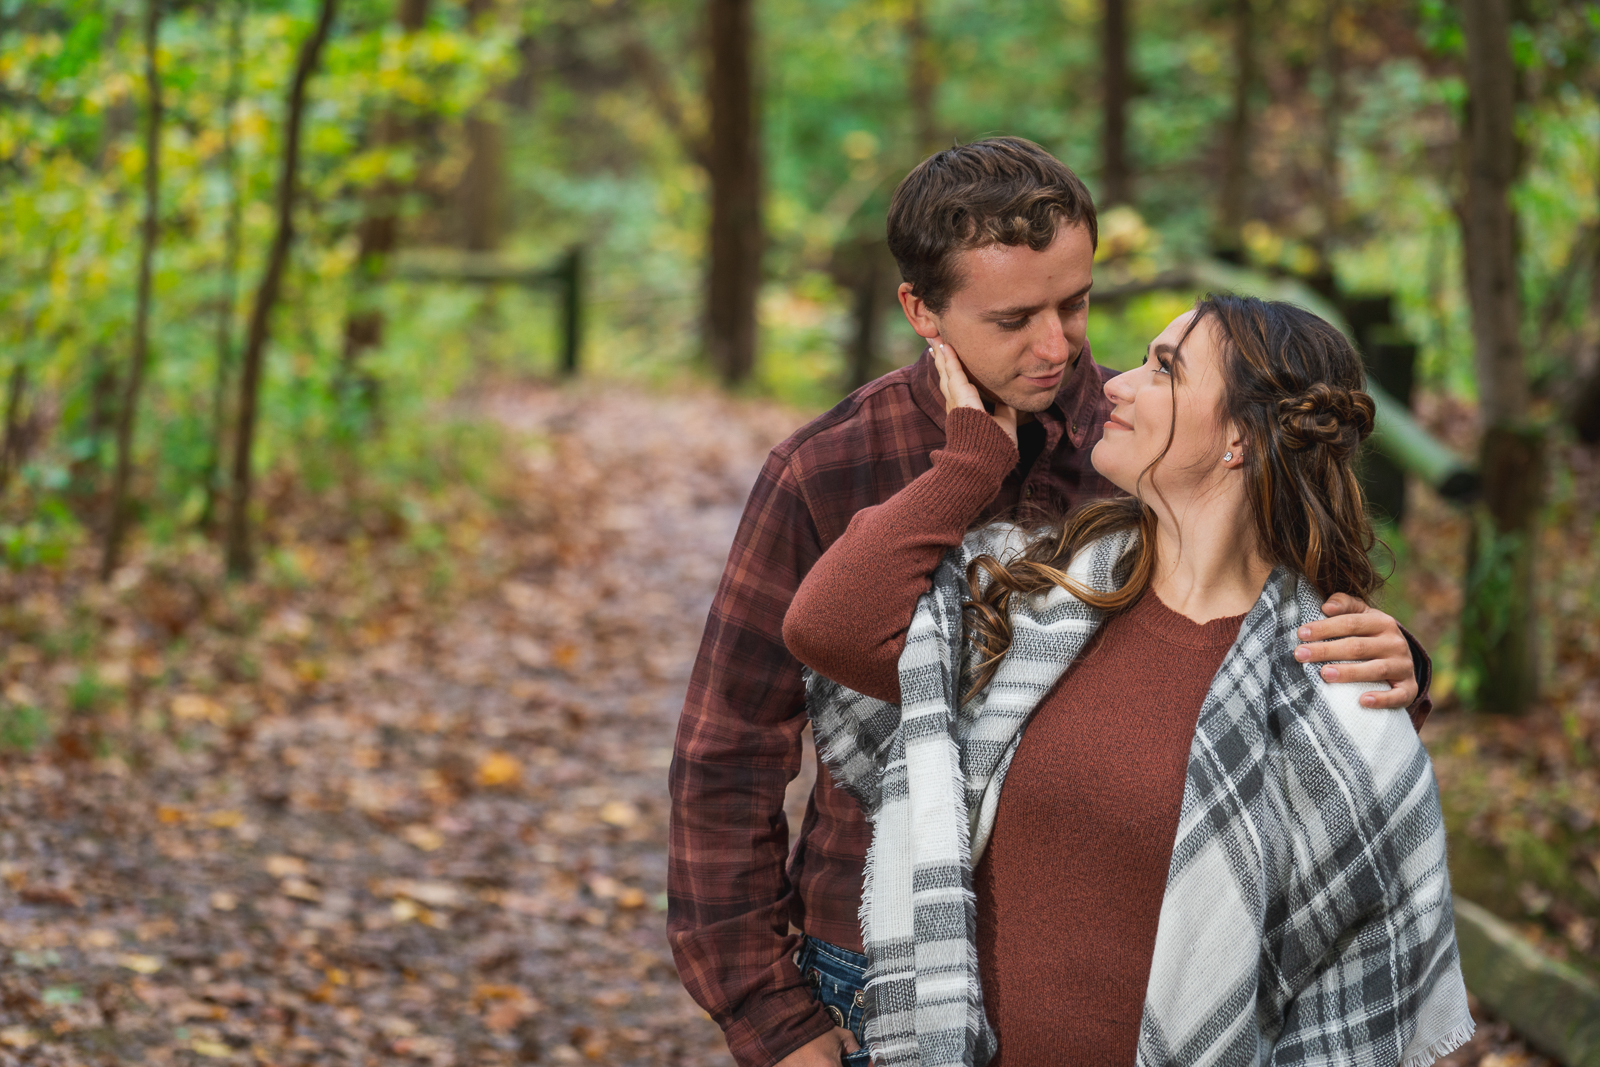 Man and woman fiancee engagement photo, outdoor fall engagement photo session at Squire's Castle, Cleveland Metroparks